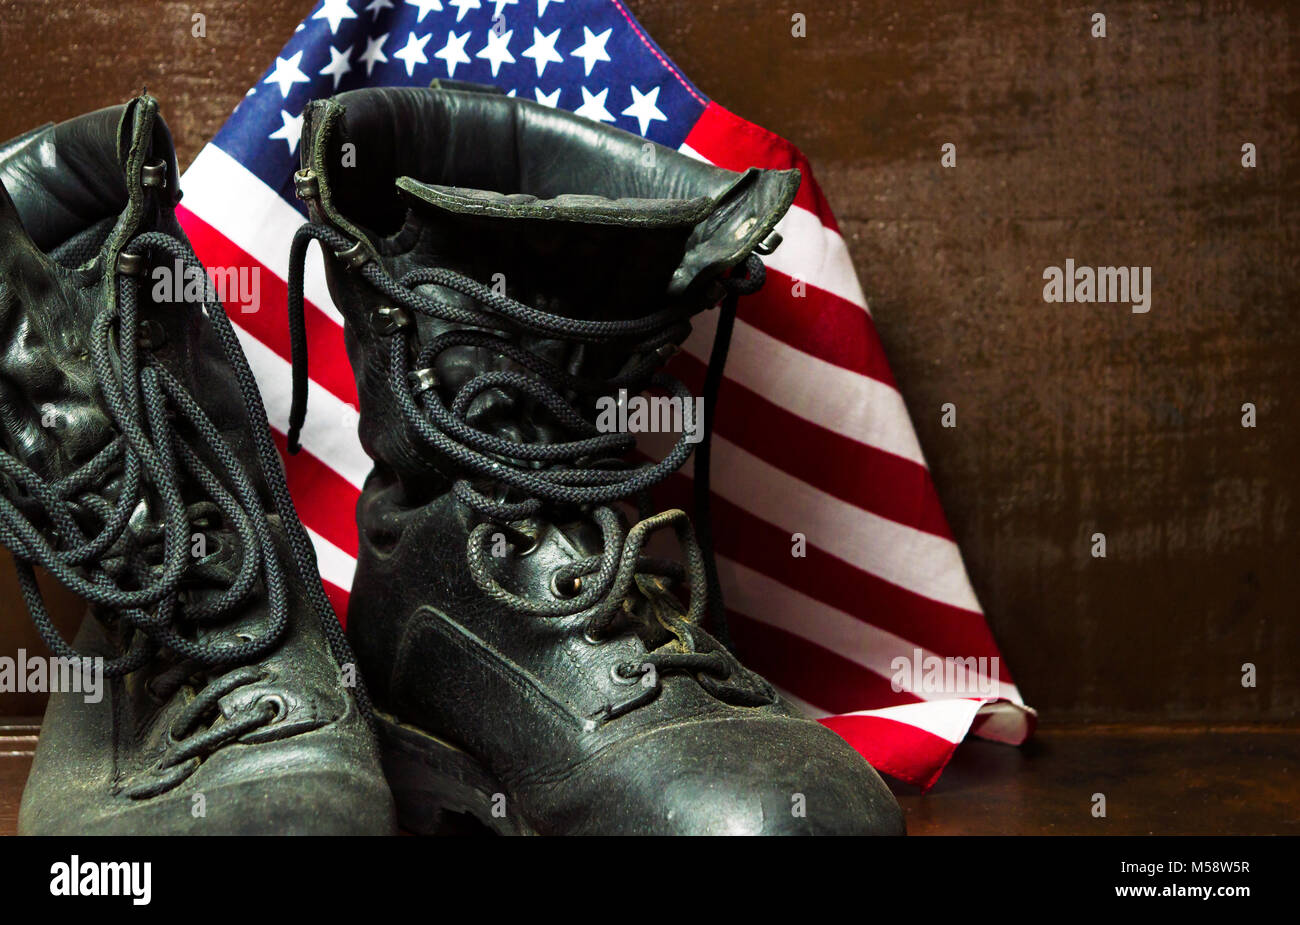 Old military army boots and USA flag Stock Photo